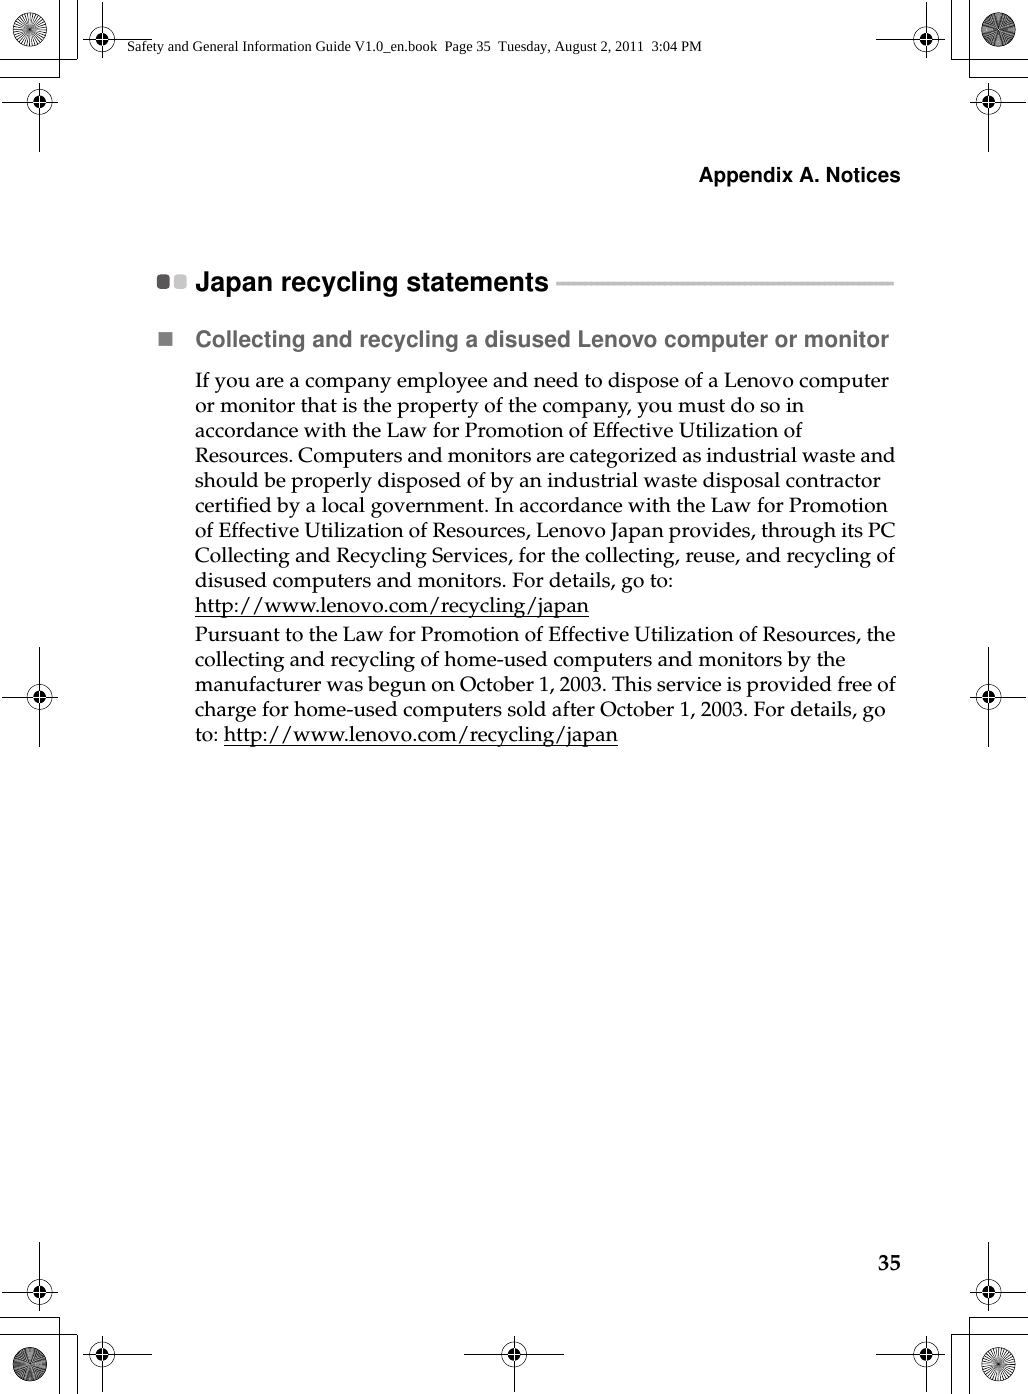 Appendix A. Notices35Japan recycling statements  - - - - - - - - - - - - - - - - - - - - - - - - - - - - - - - - - - - - - - - - - - - - - - - - - - - - - - - - - - - Collecting and recycling a disused Lenovo computer or monitorIf you are a company employee and need to dispose of a Lenovo computer or monitor that is the property of the company, you must do so in accordance with the Law for Promotion of Effective Utilization of Resources. Computers and monitors are categorized as industrial waste and should be properly disposed of by an industrial waste disposal contractor certified by a local government. In accordance with the Law for Promotion of Effective Utilization of Resources, Lenovo Japan provides, through its PC Collecting and Recycling Services, for the collecting, reuse, and recycling of disused computers and monitors. For details, go to: http://www.lenovo.com/recycling/japan Pursuant to the Law for Promotion of Effective Utilization of Resources, the collecting and recycling of home-used computers and monitors by the manufacturer was begun on October 1, 2003. This service is provided free of charge for home-used computers sold after October 1, 2003. For details, go to: http://www.lenovo.com/recycling/japanSafety and General Information Guide V1.0_en.book  Page 35  Tuesday, August 2, 2011  3:04 PM